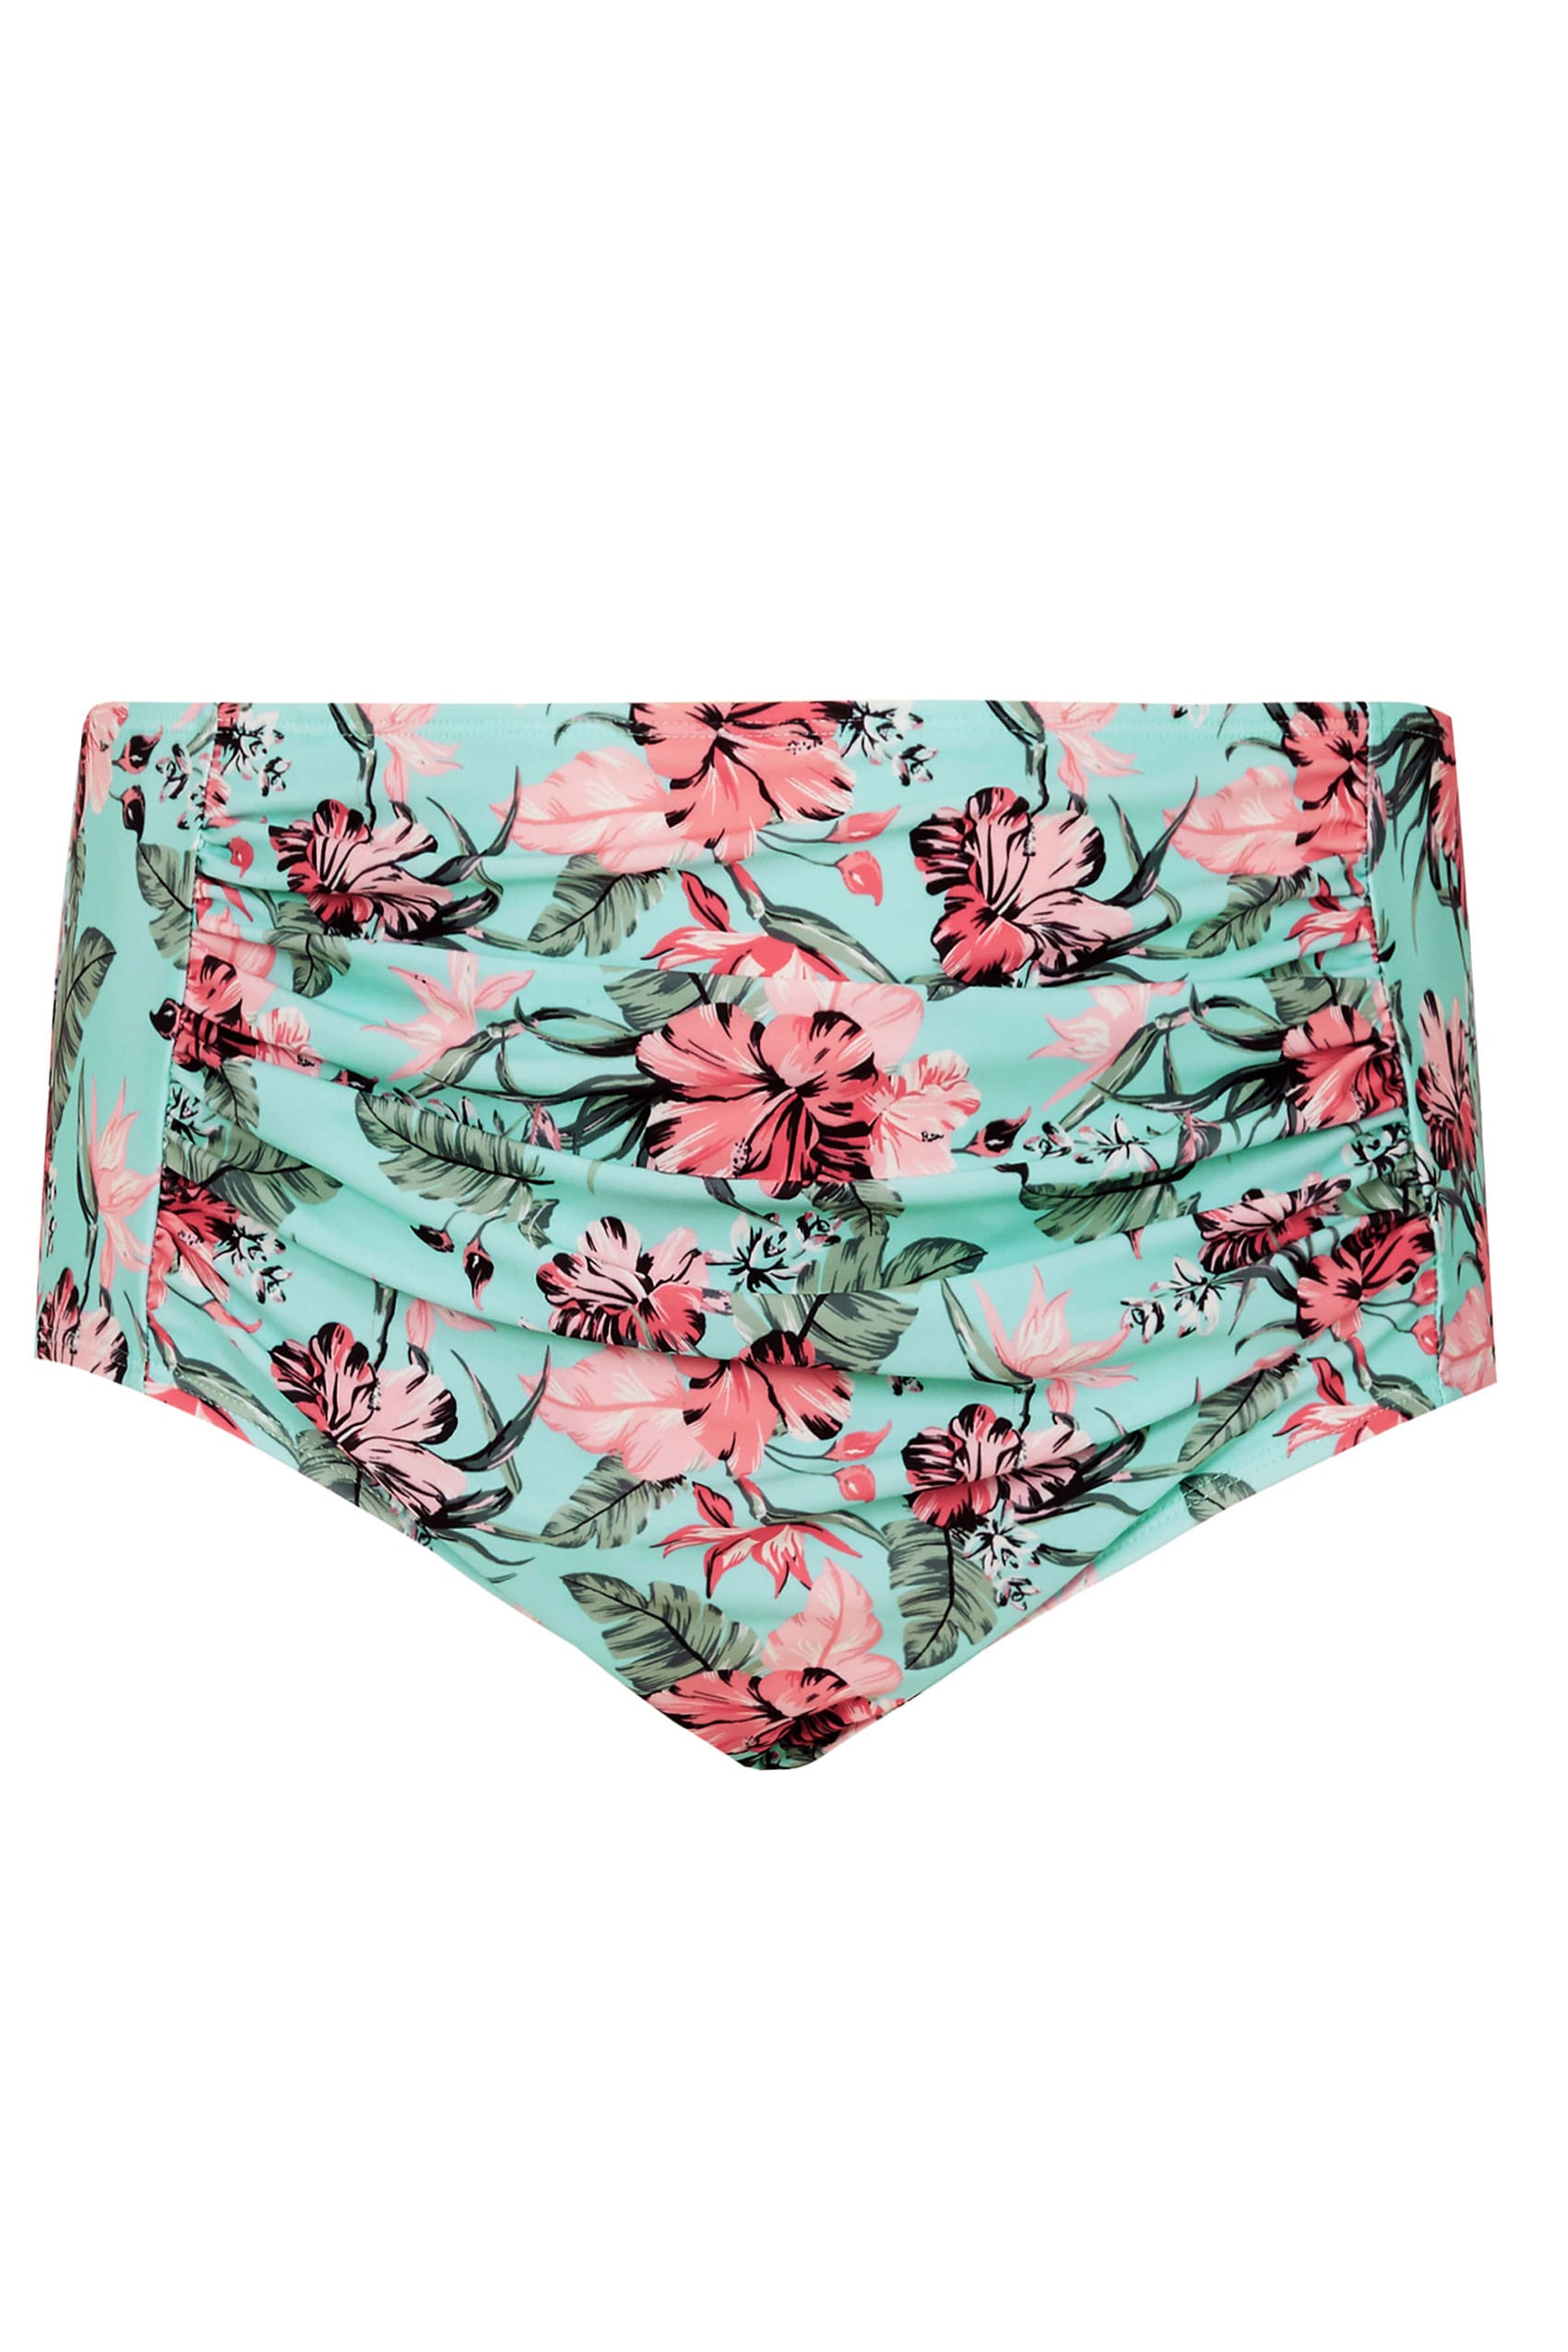 Blue & Pink Floral Print Bikini Briefs With Ruched Panel, plus size 16 ...